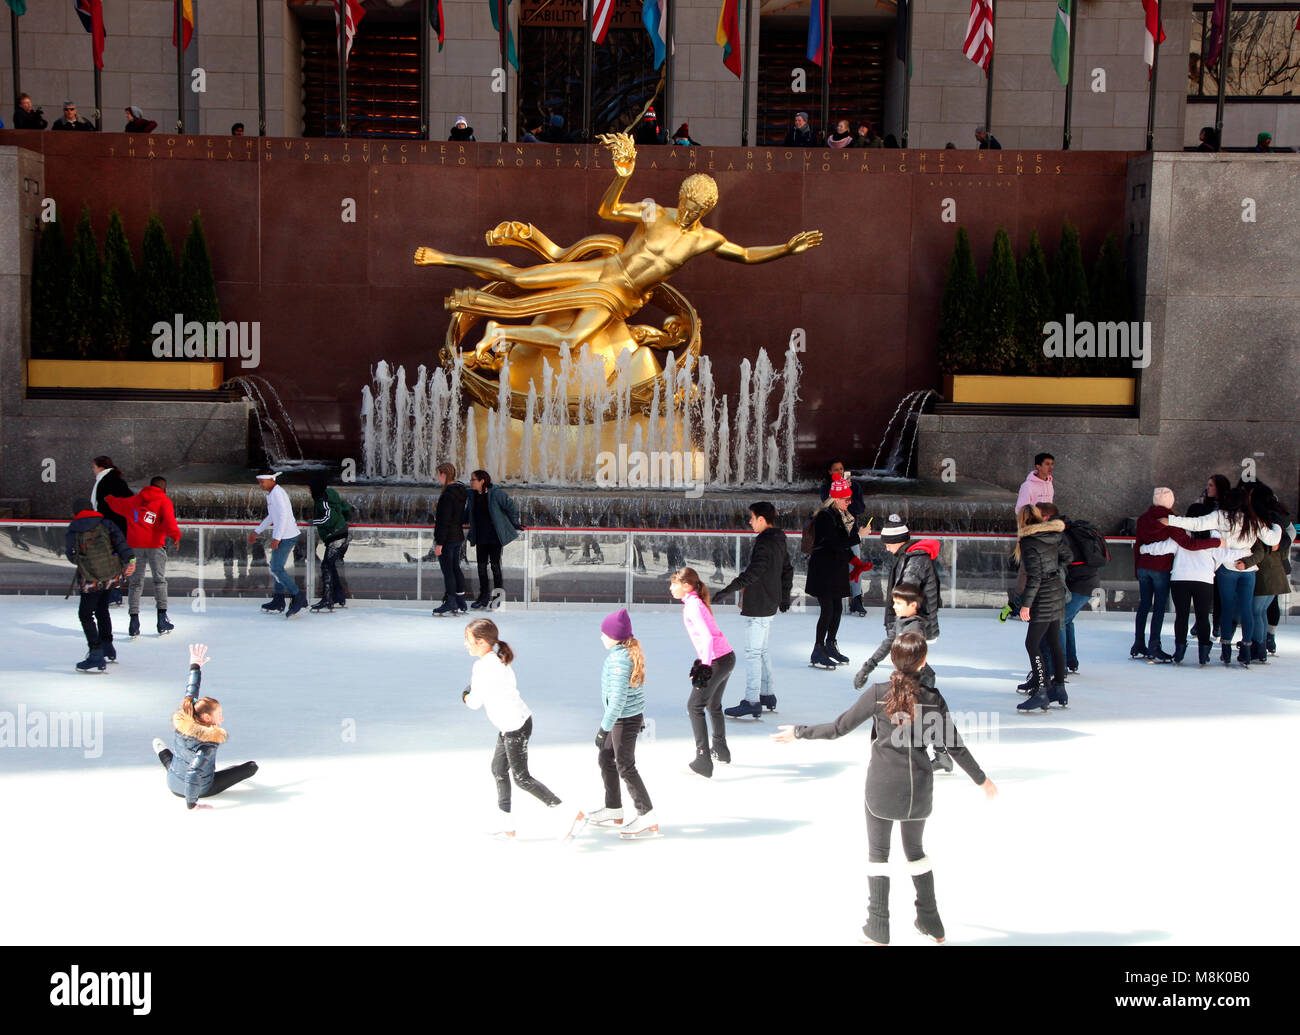 Skaters on the Rockefeller Ice rink, NYC Stock Photo